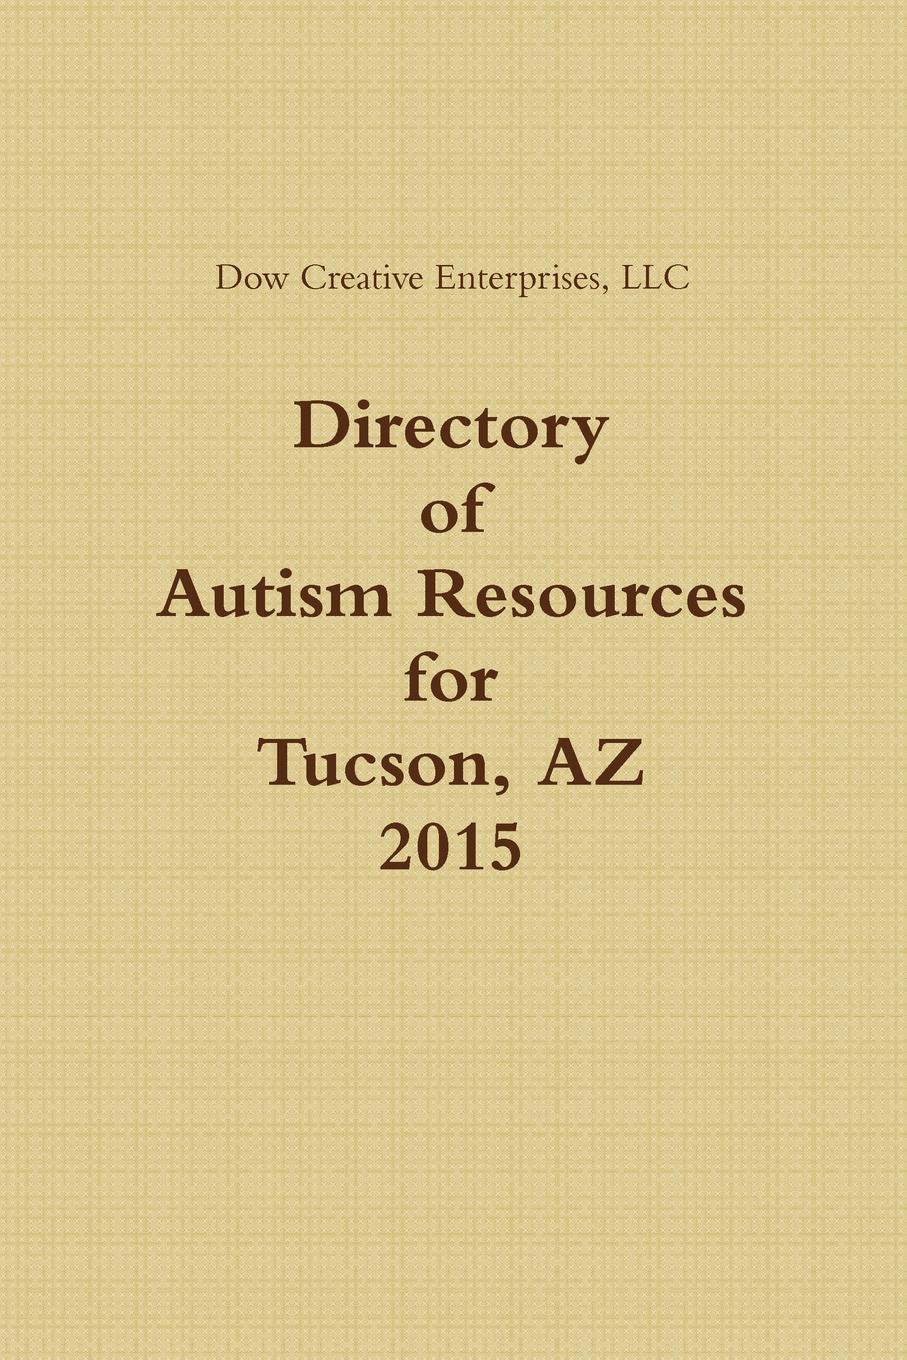 Directory of Autism Resources for Tucson, AZ